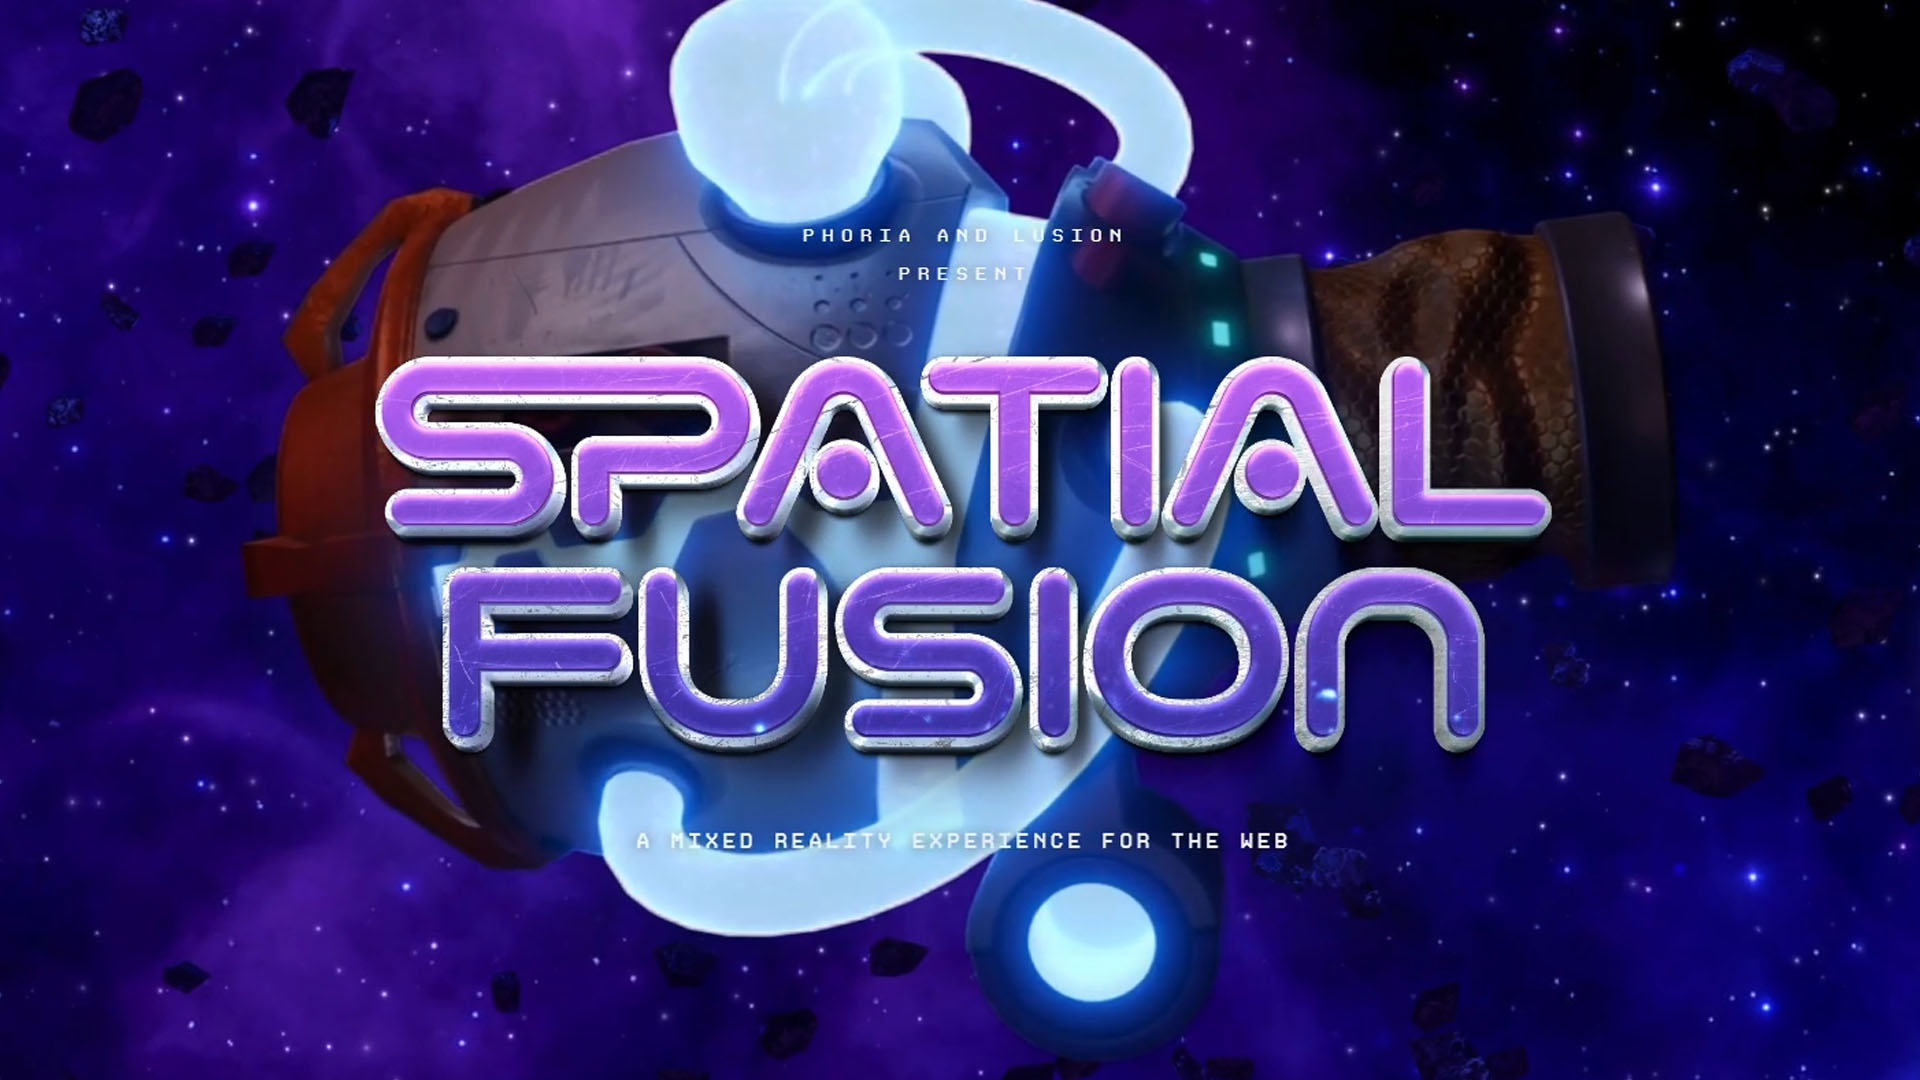 Spatial Fusion - A Mixed Reality Experience for the Web